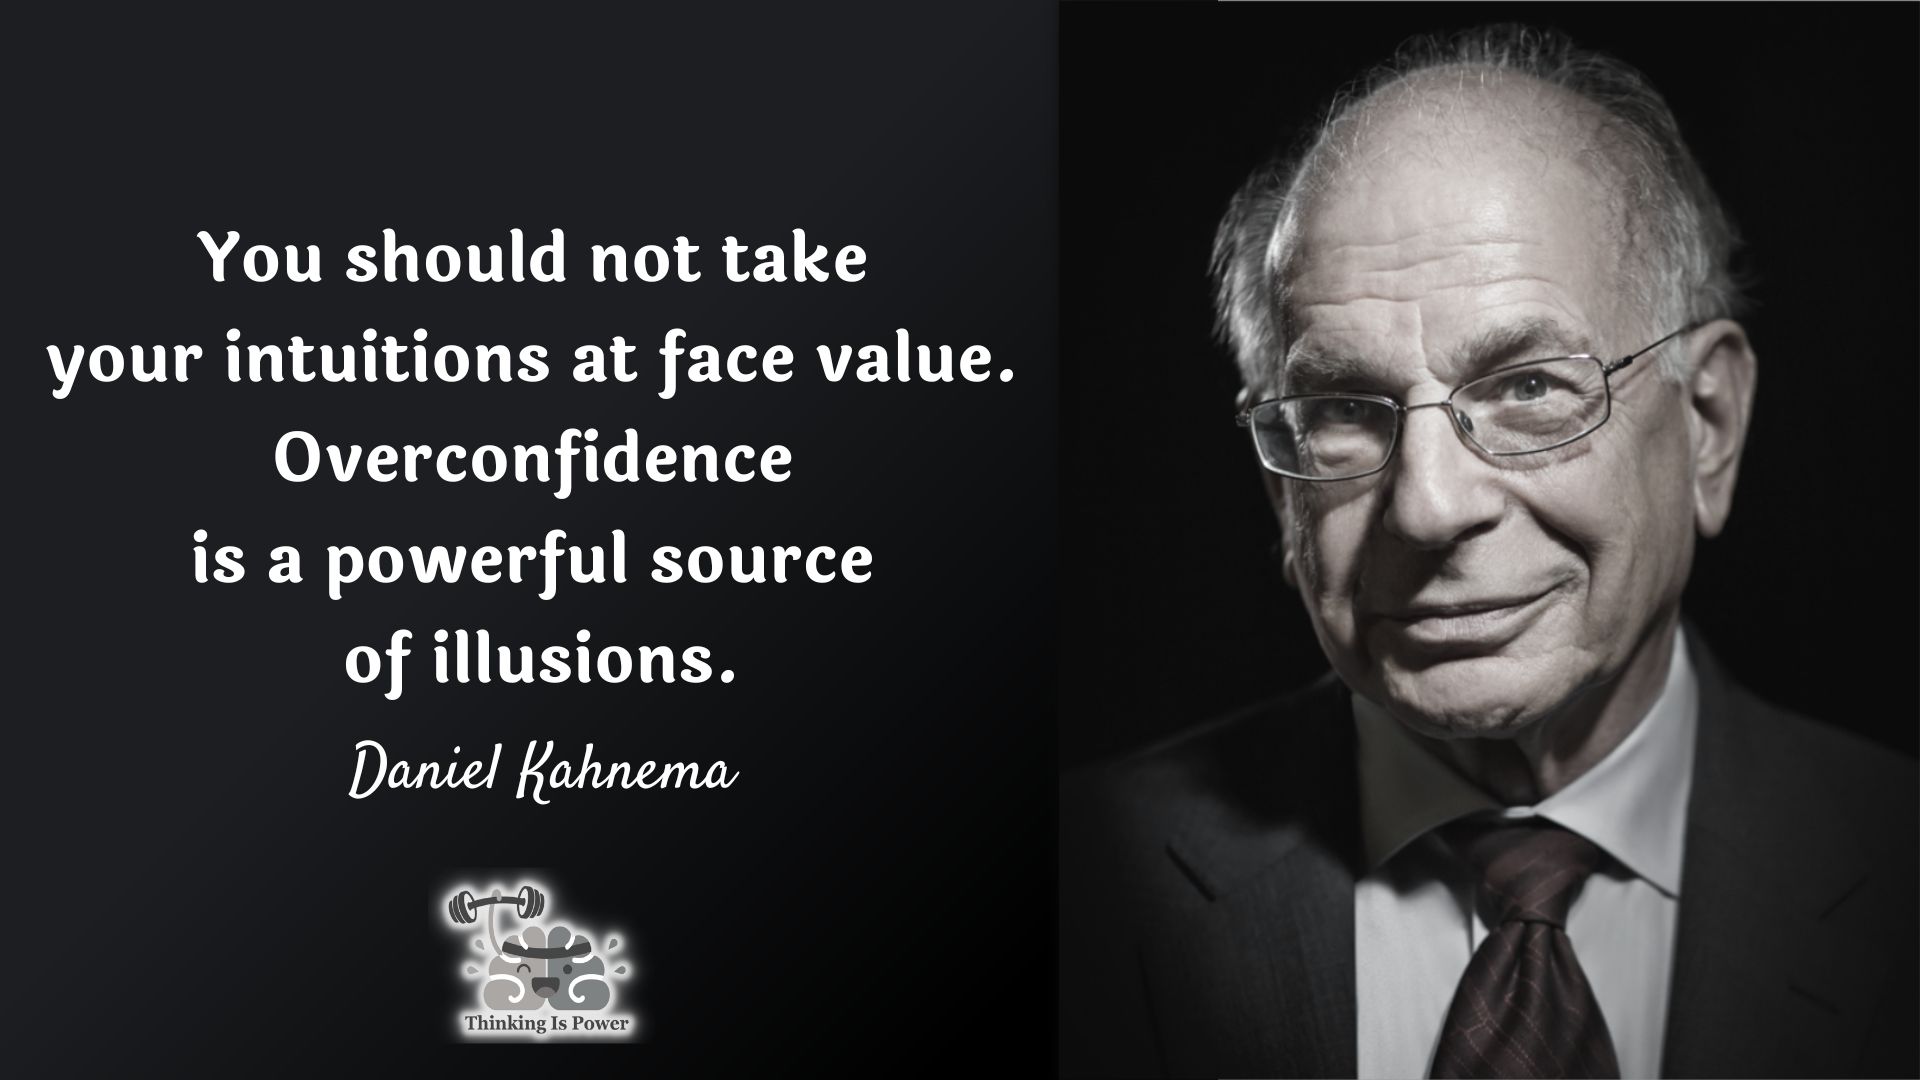 Daniel Kahneman quote. You should not take your intuitions at face value. Overconfidence is a powerful source of illusions.